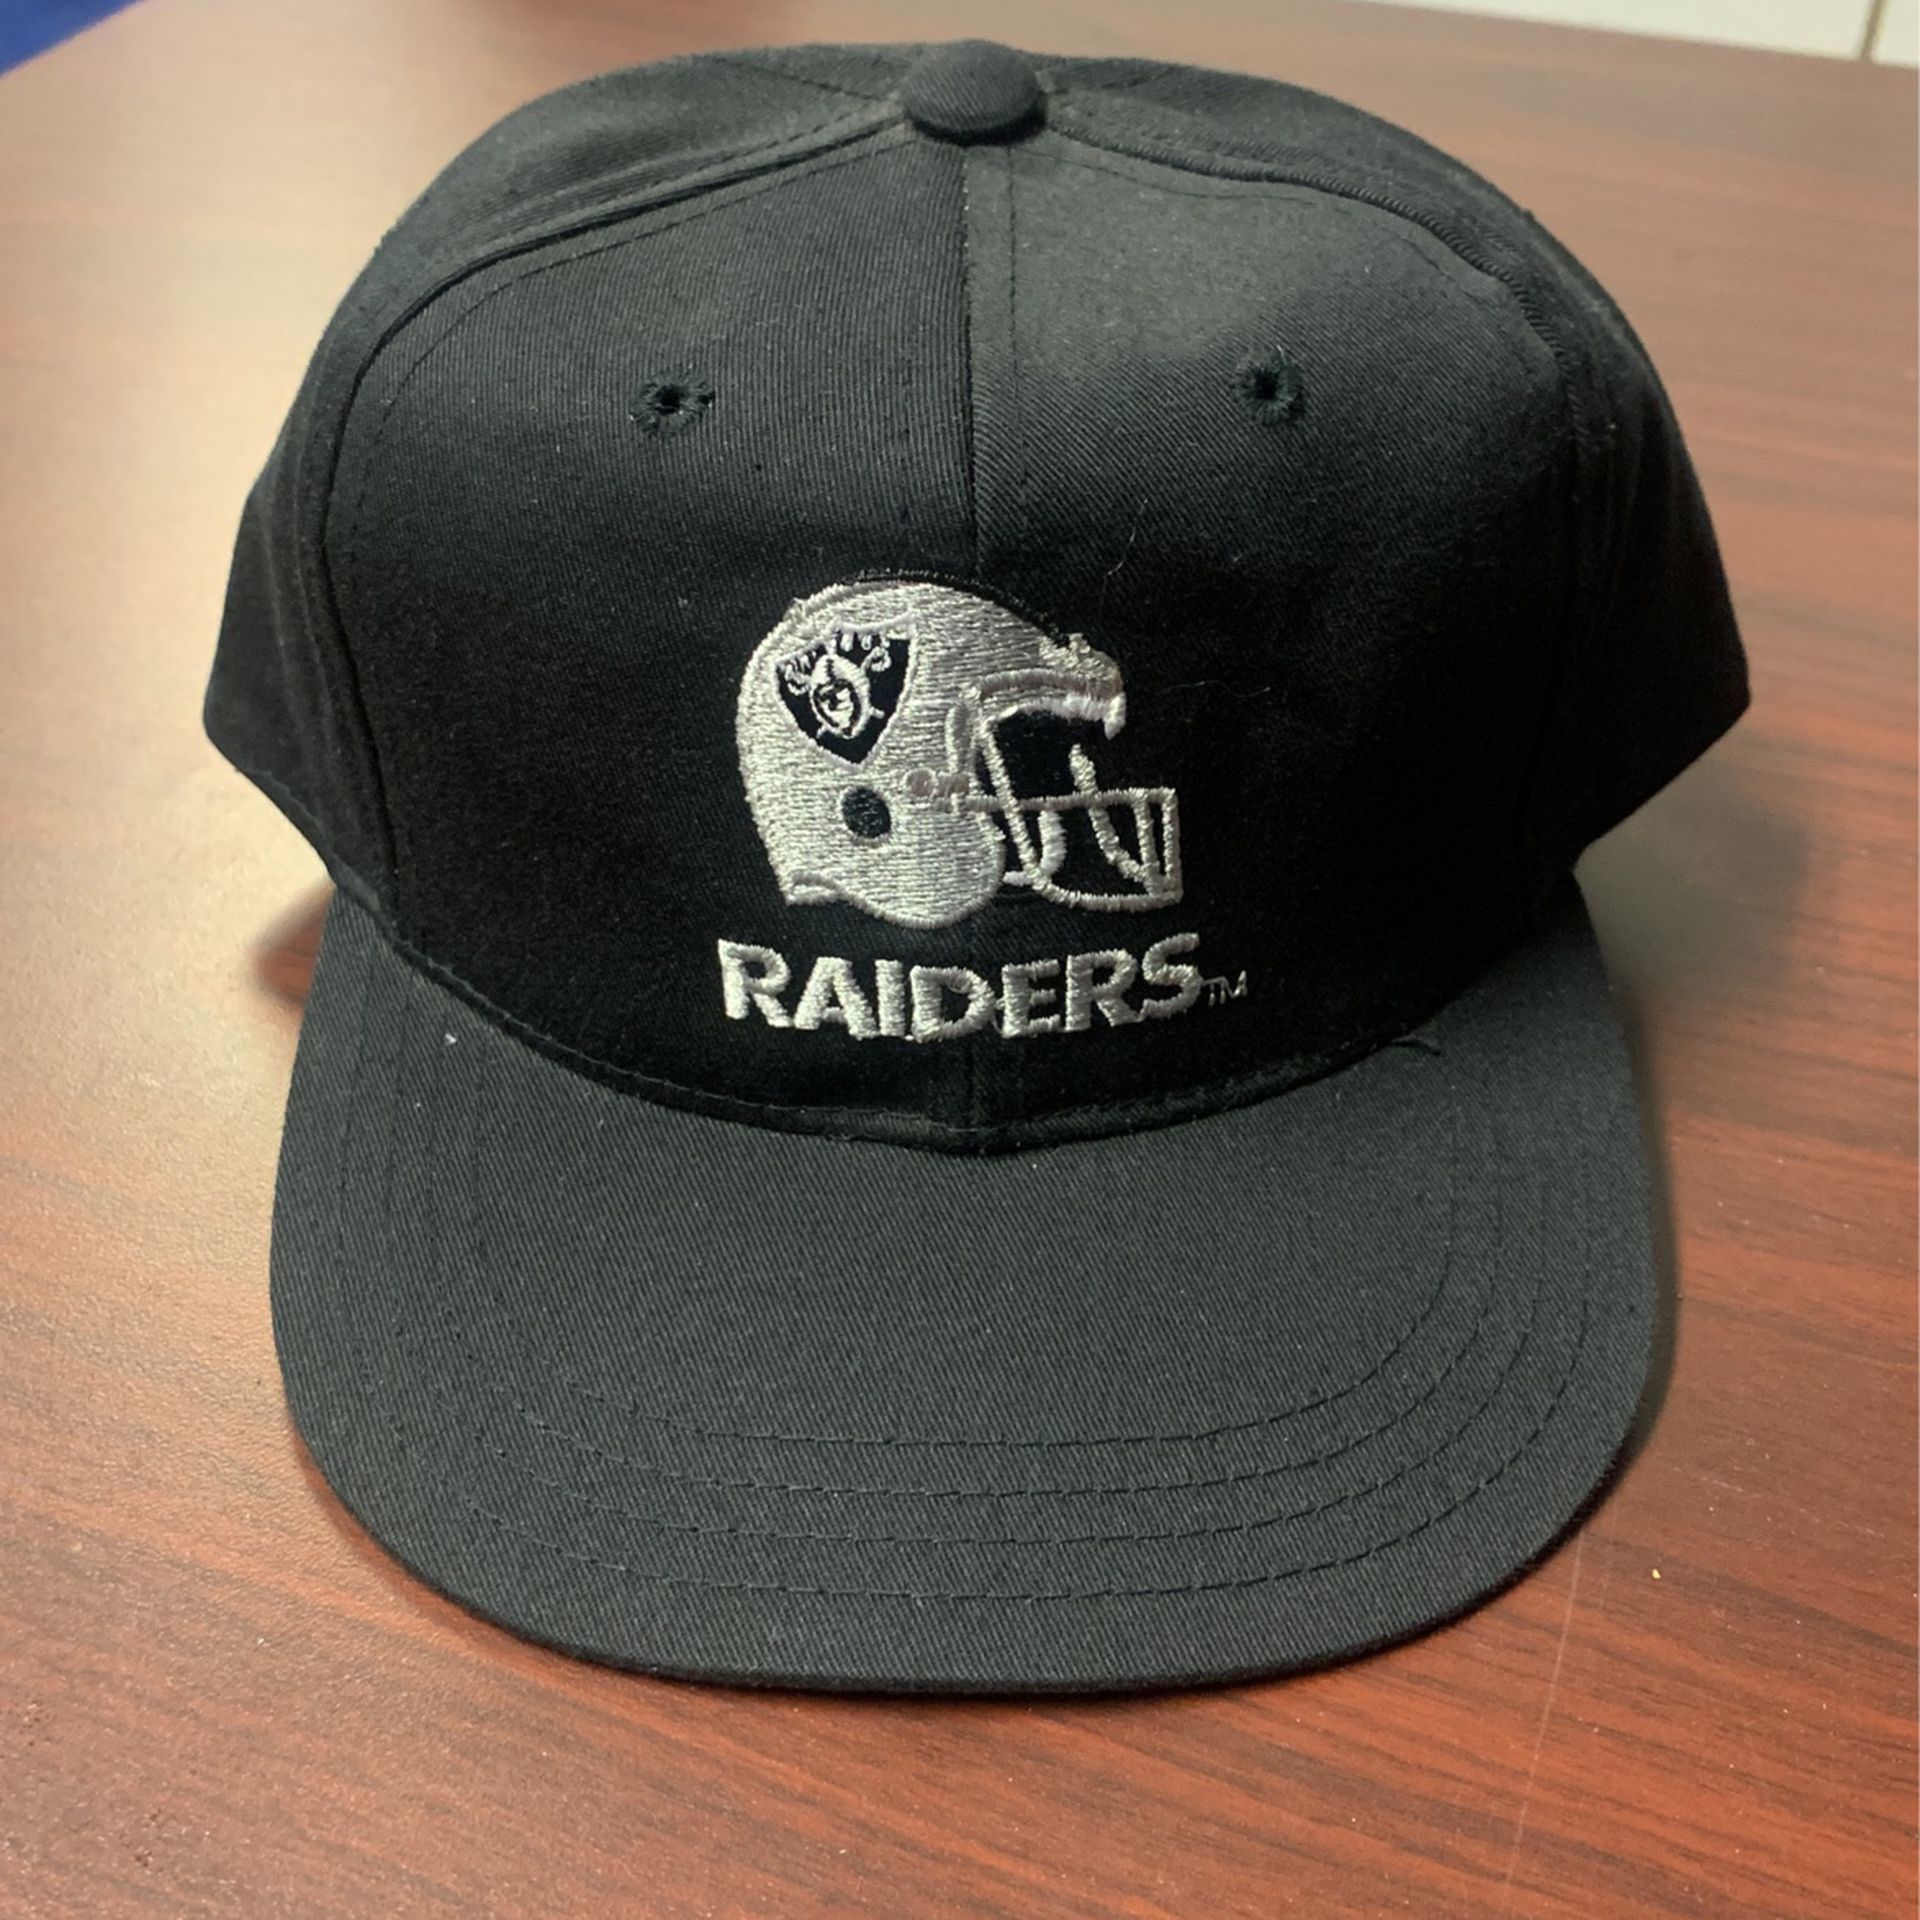 Las Vegas Raiders '47 Brand Clean-Up Hat for Sale in Indio, CA - OfferUp